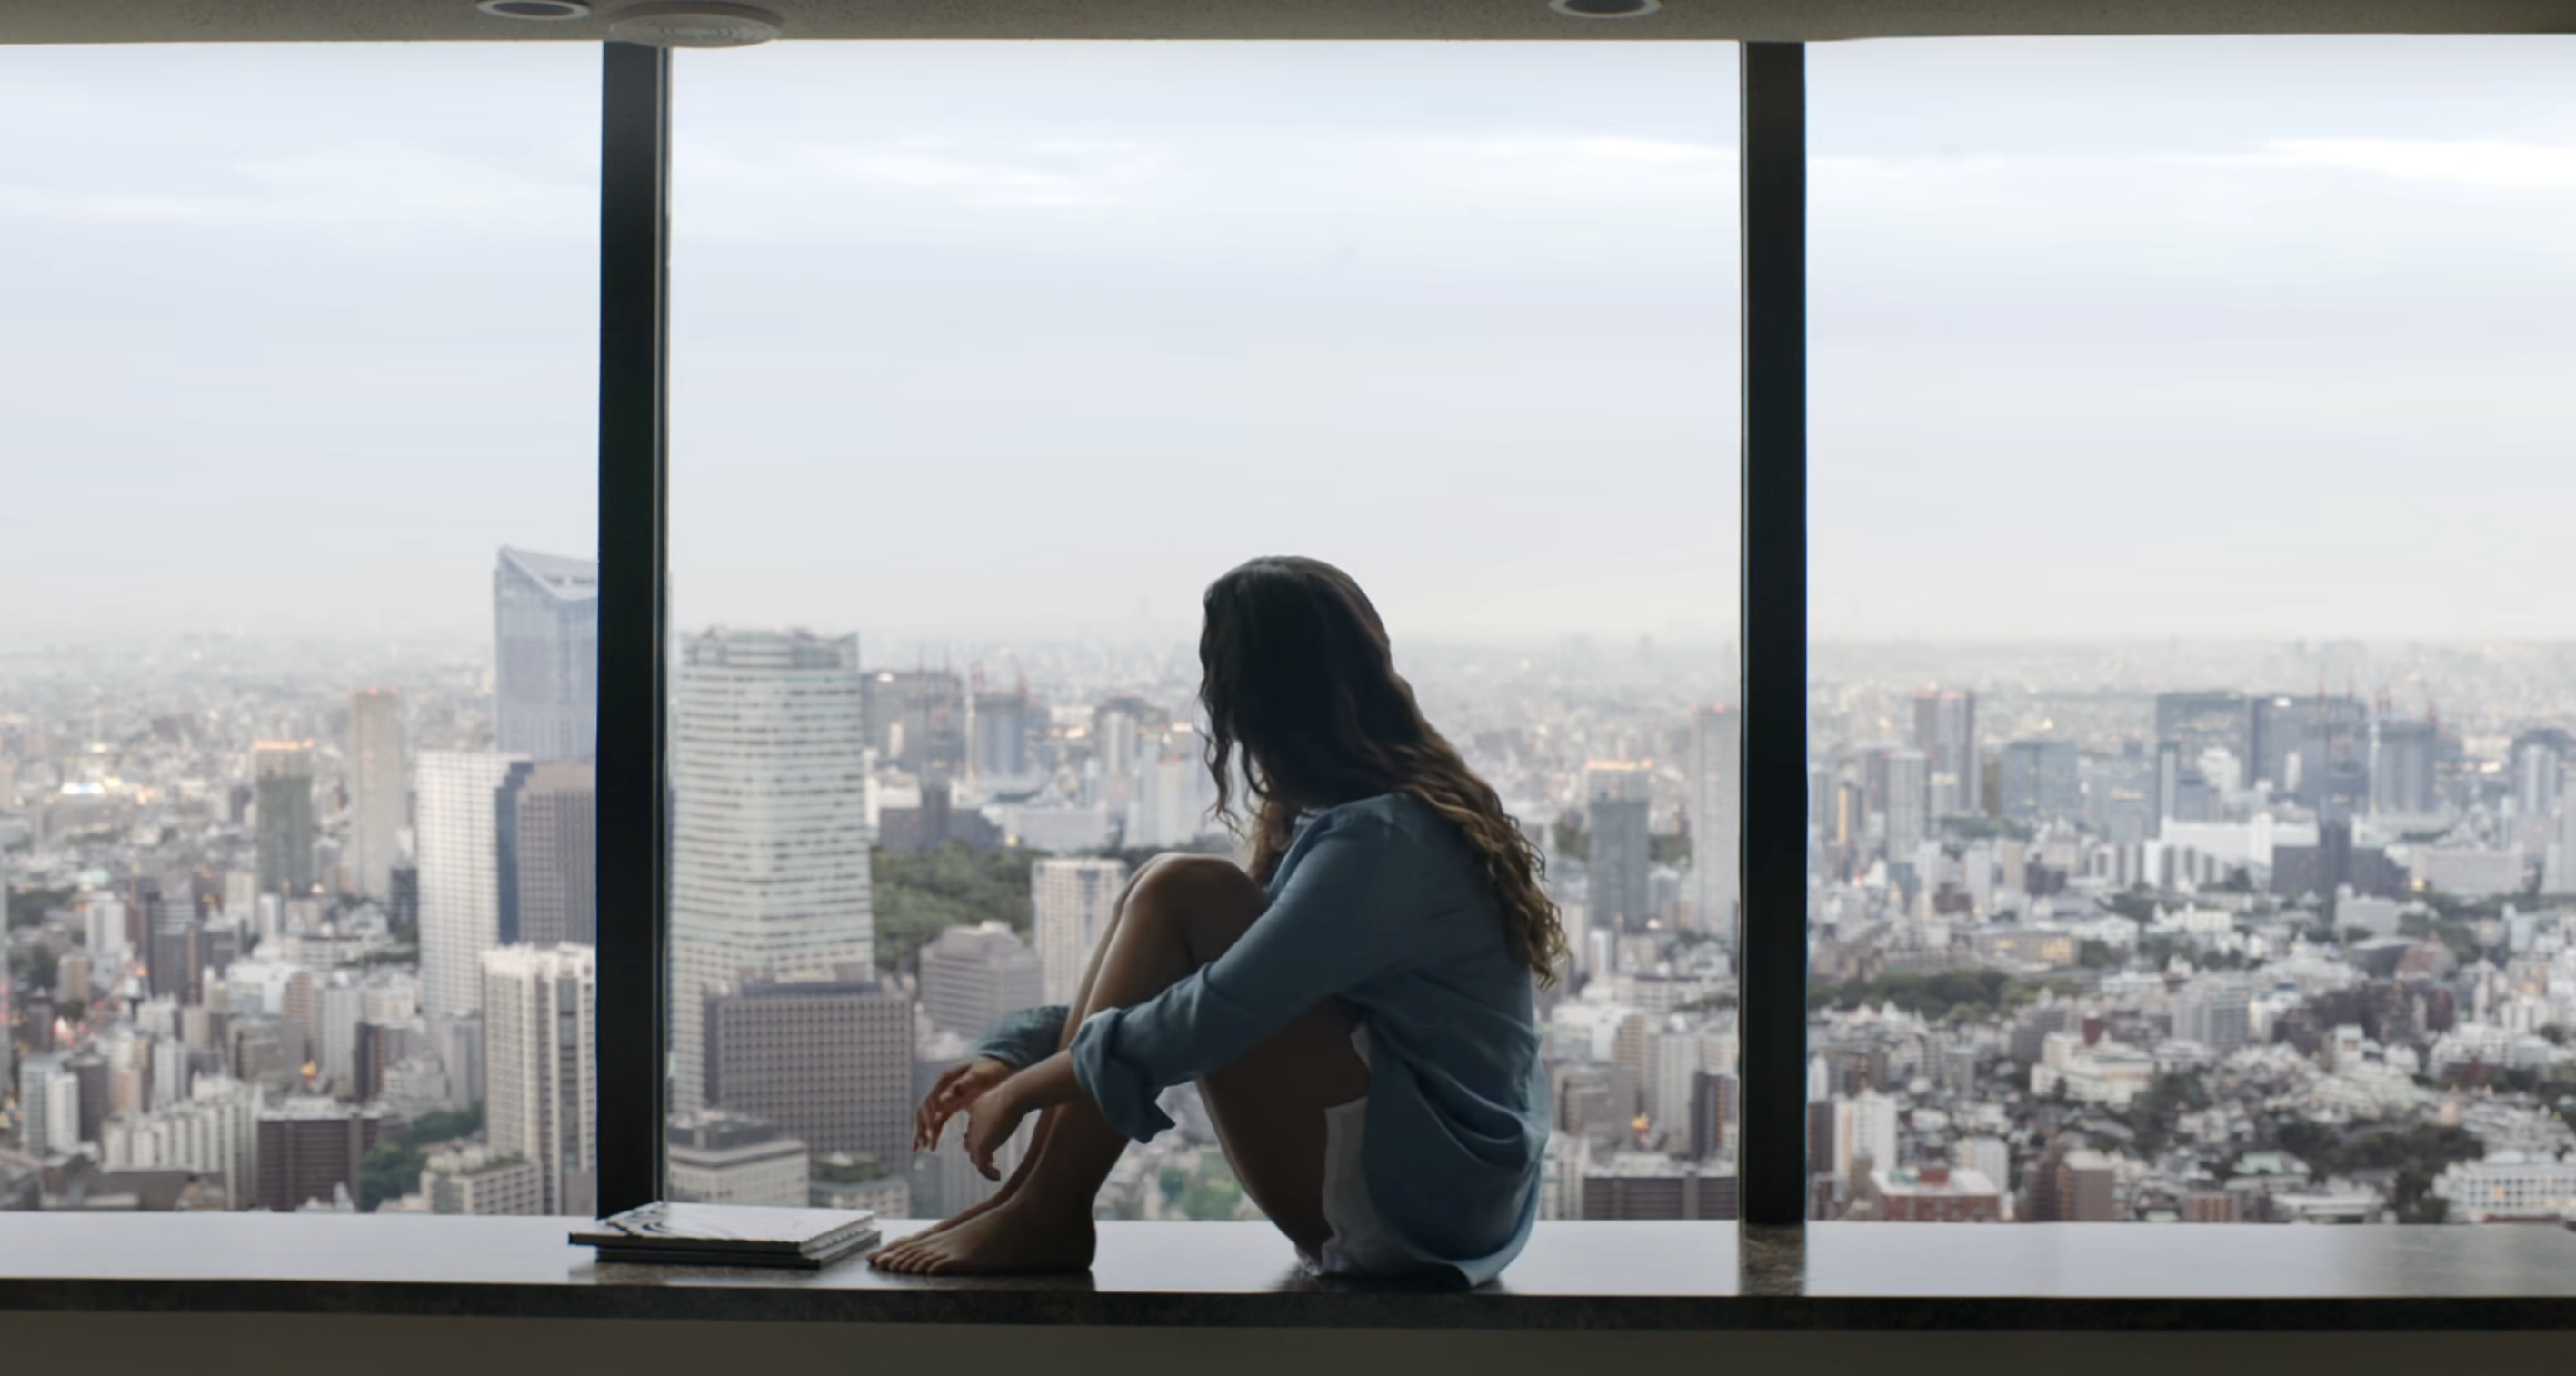 A woman sitting in a hotel window overlooking a city